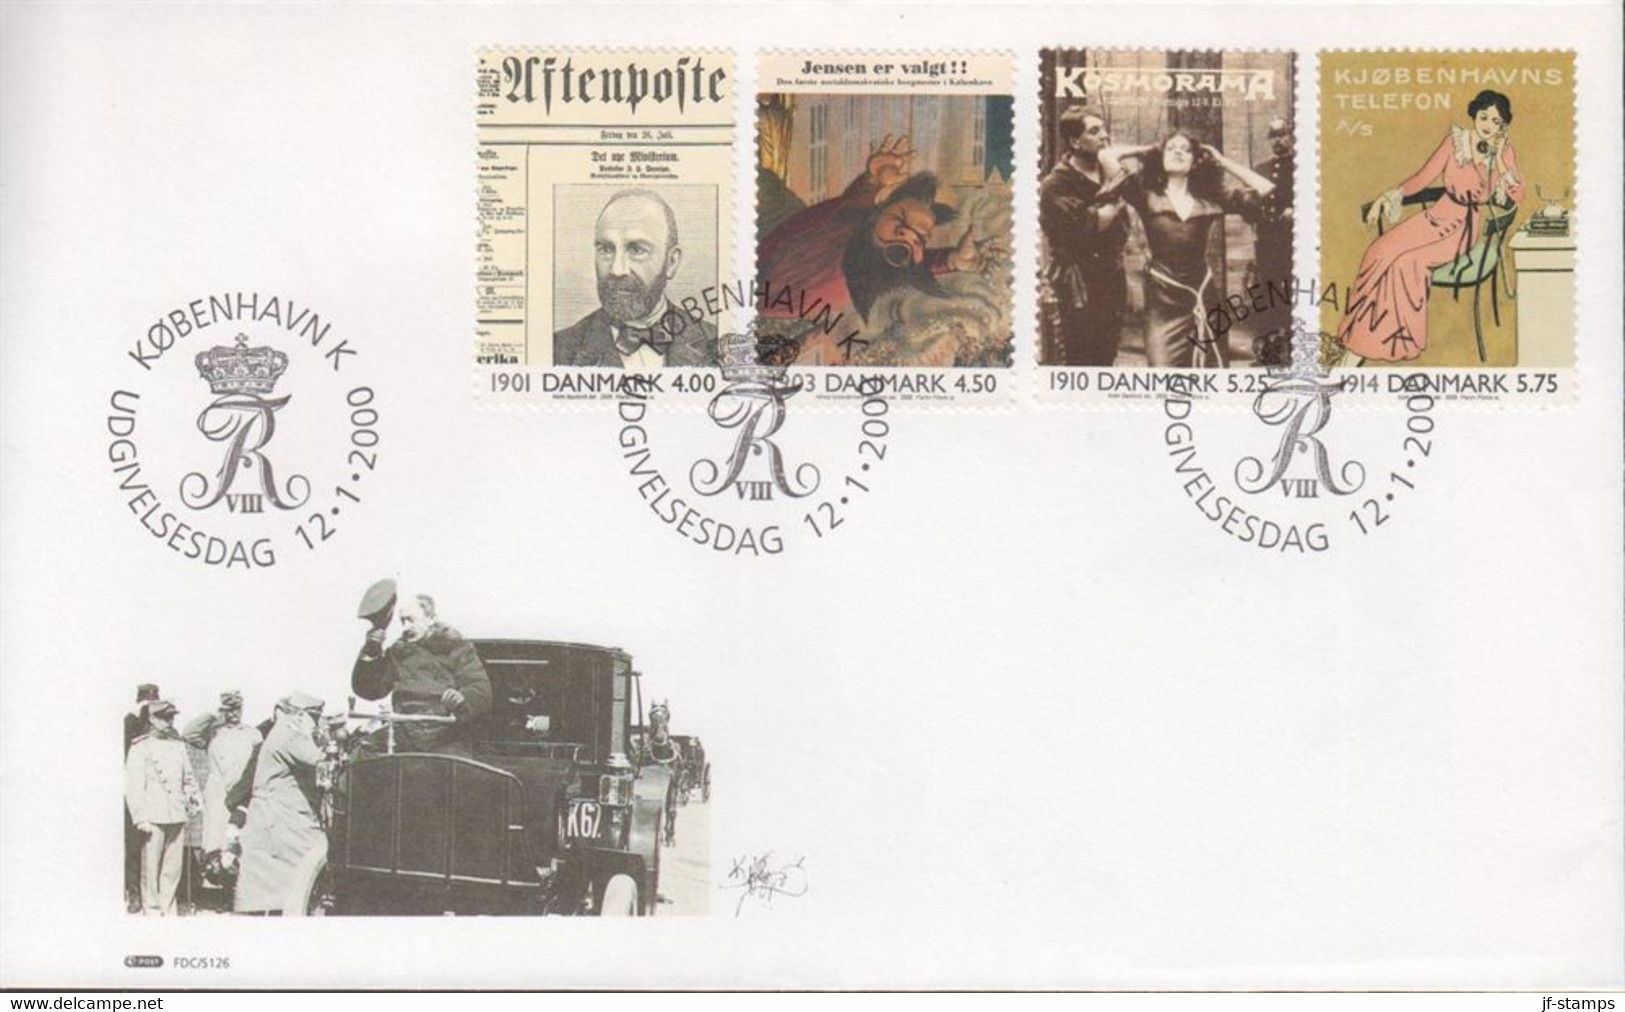 2000. DANMARK. Key Moments In The 20th Cent. Complete Set On FDC 12.1.2000.  (Michel 1234-1237) - JF434089 - Covers & Documents